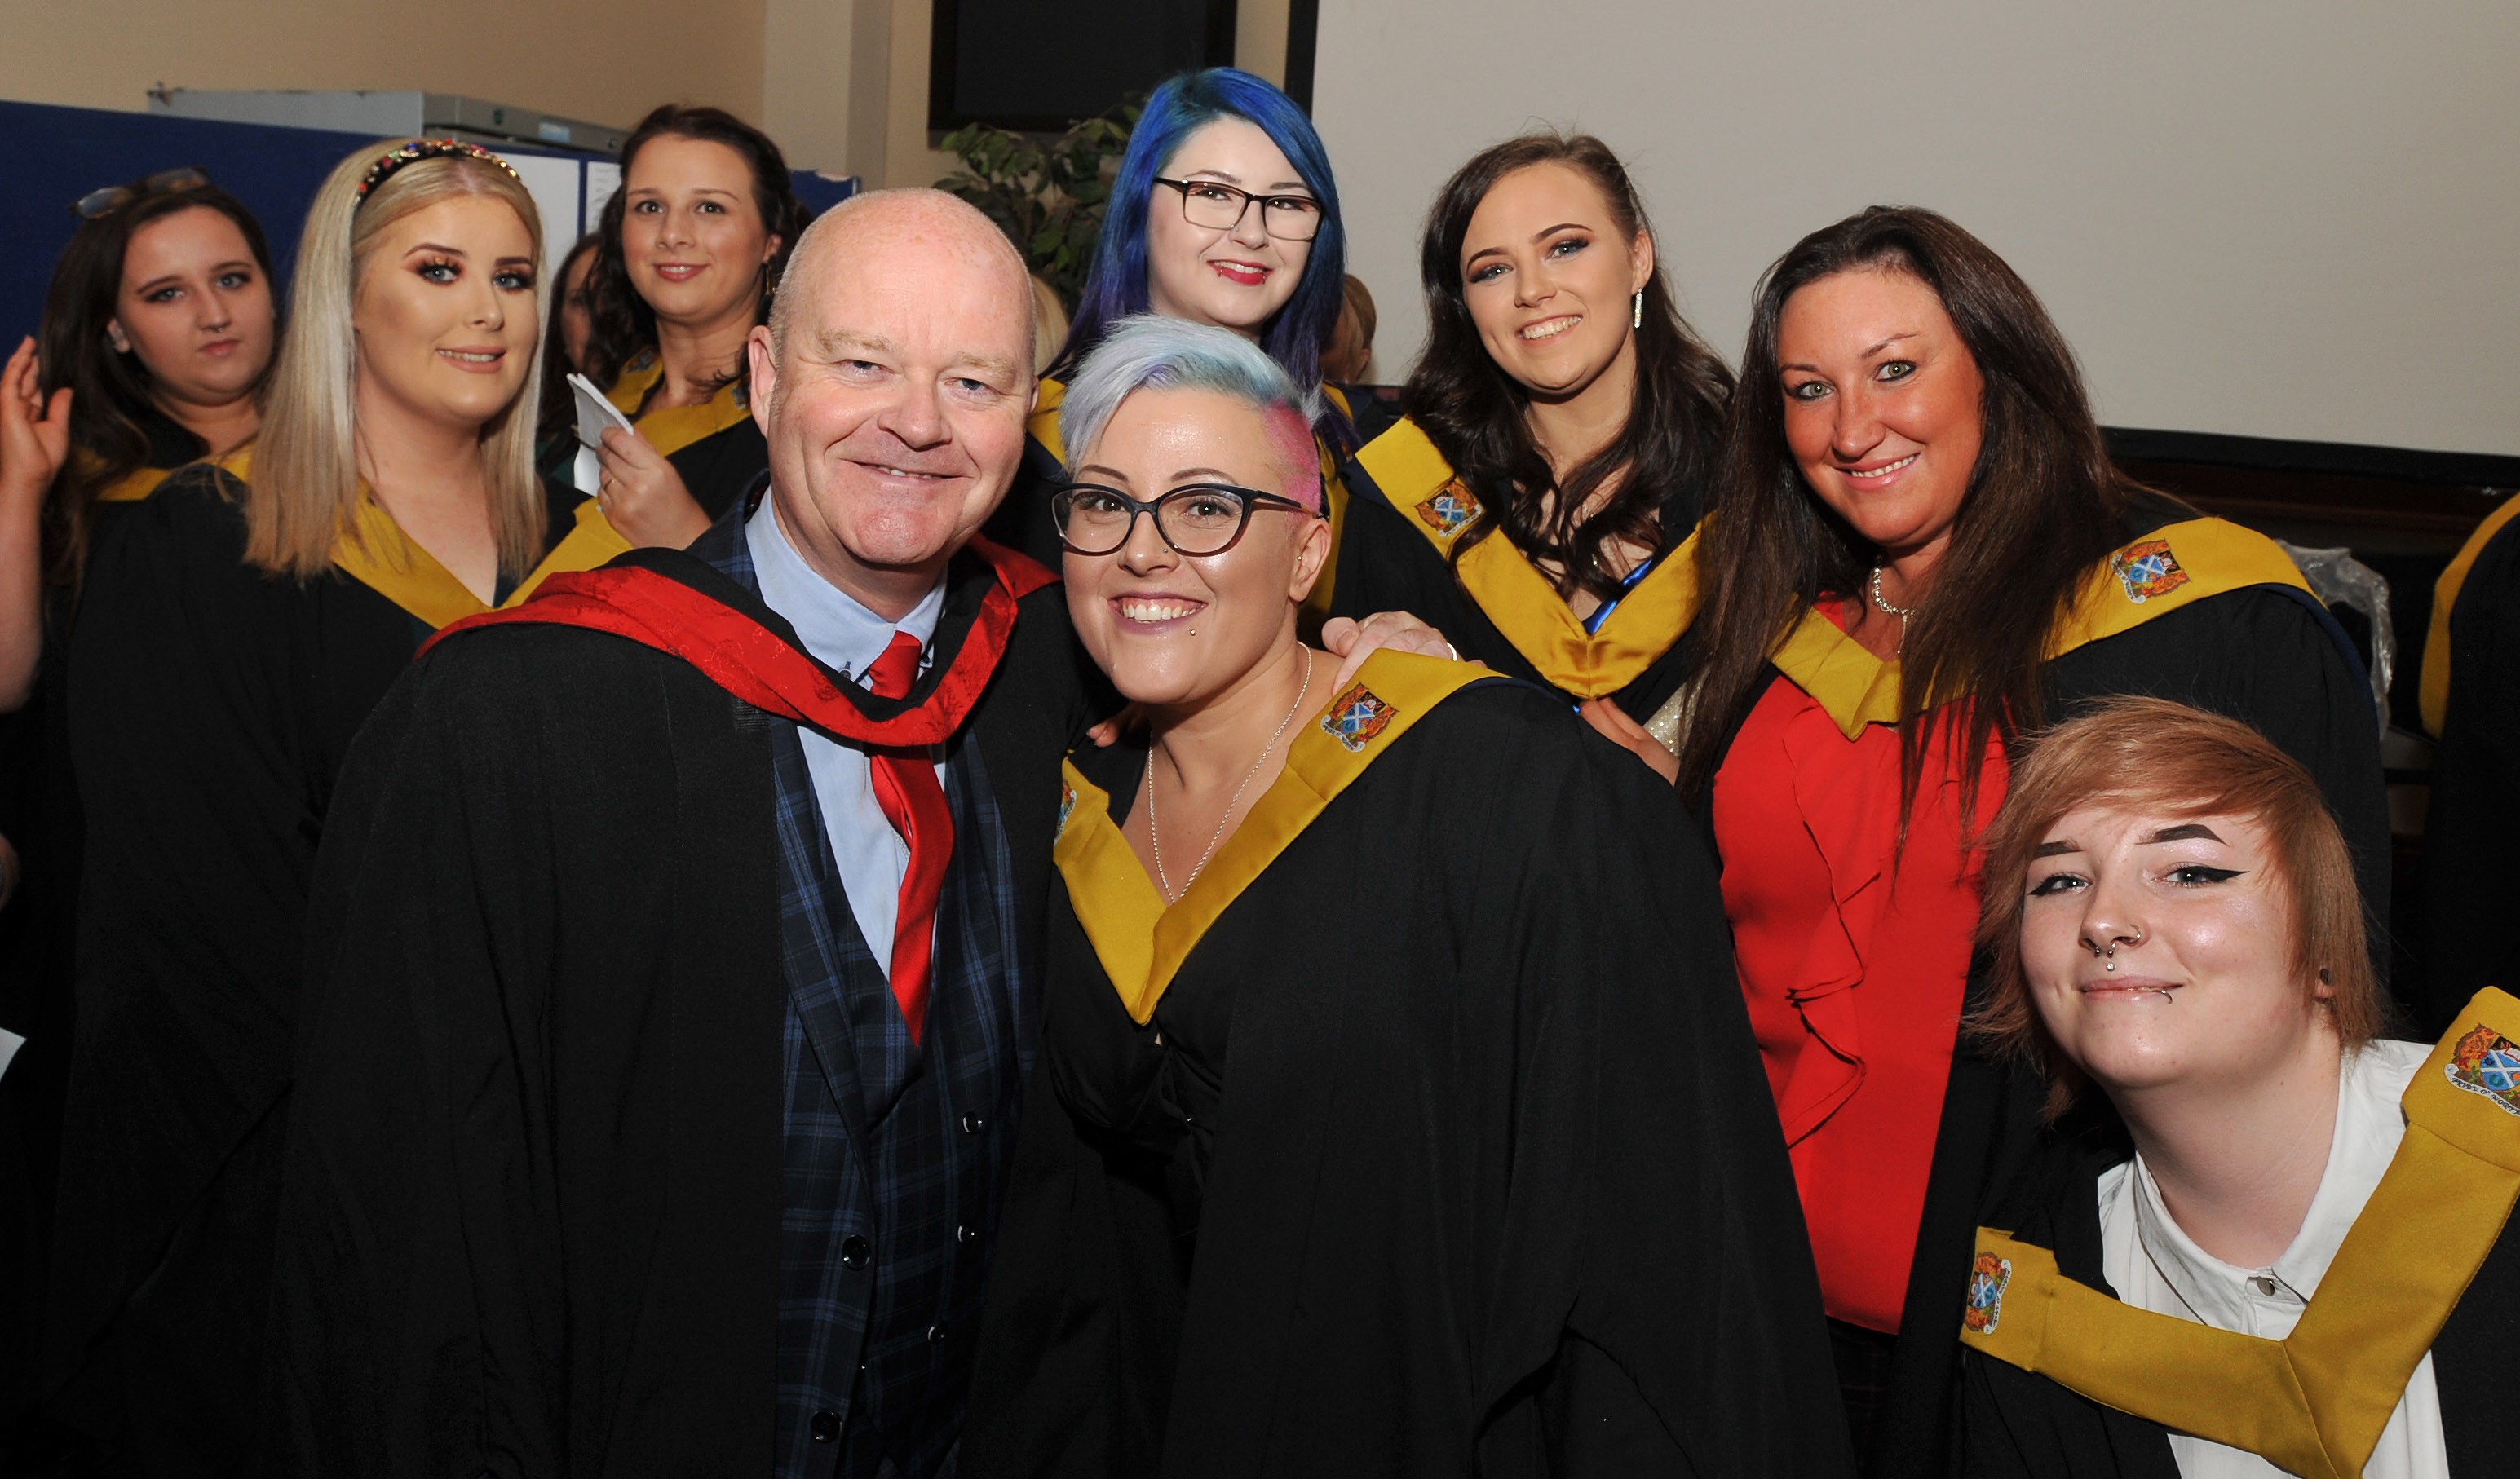 Last chance to sign up for Ayrshire College graduation